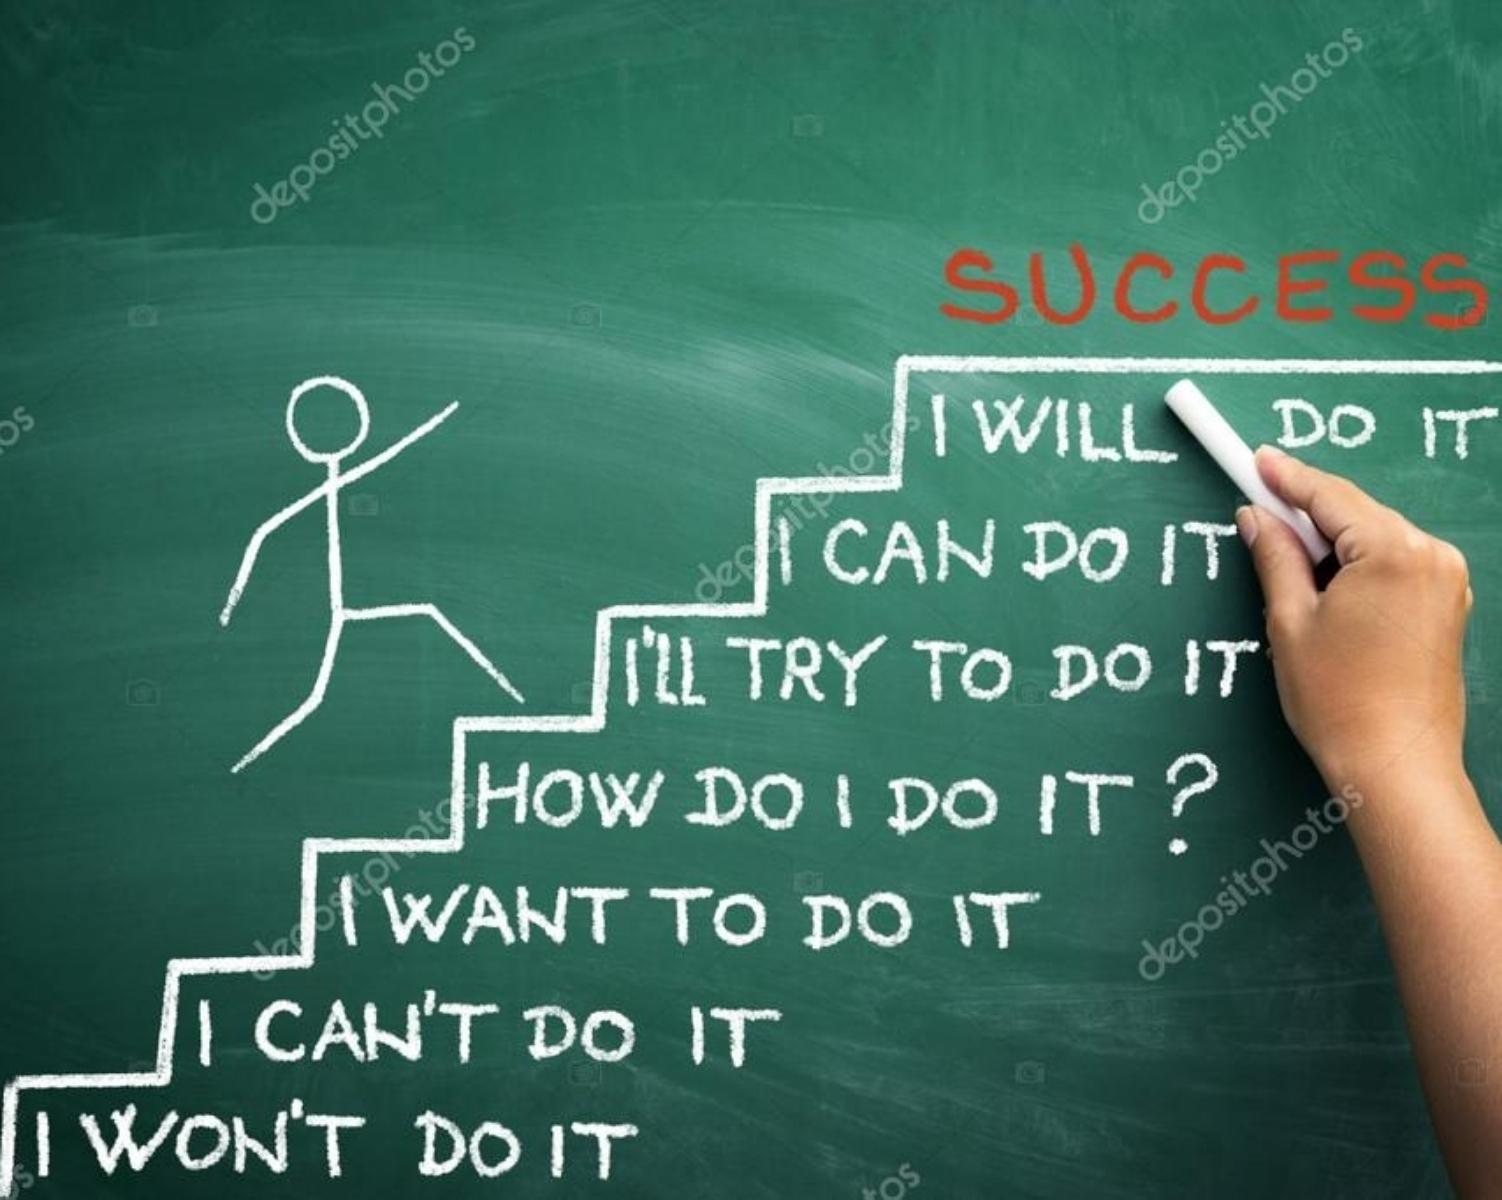 Step1: Believe In Your Capability Of Being Successful 